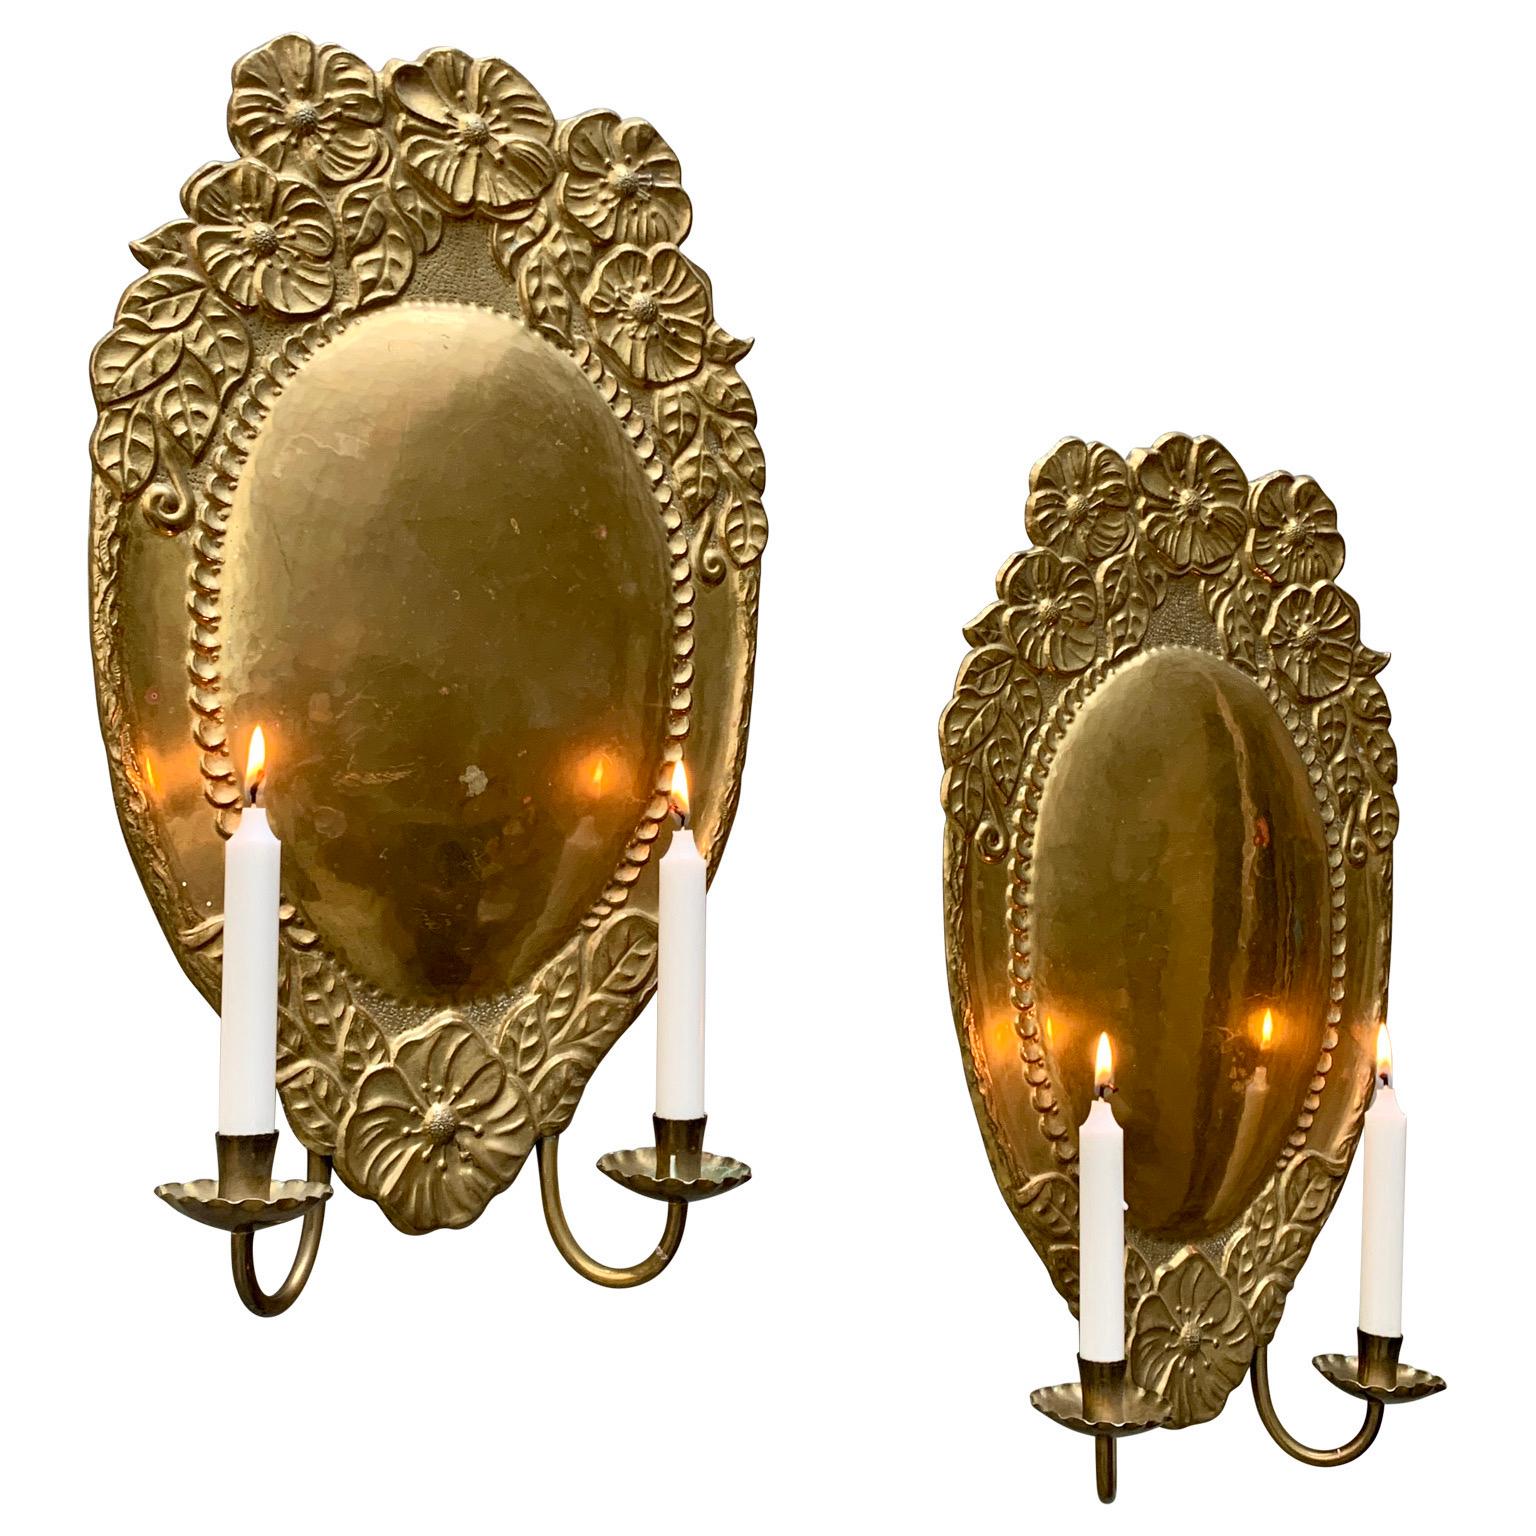 Pair of Liberty style wall sconces in brass with double candle holders on each sconce.
The rich flower decoration is typical for this period of the early 20th Century in Europe, were it has been called in different manner, like 